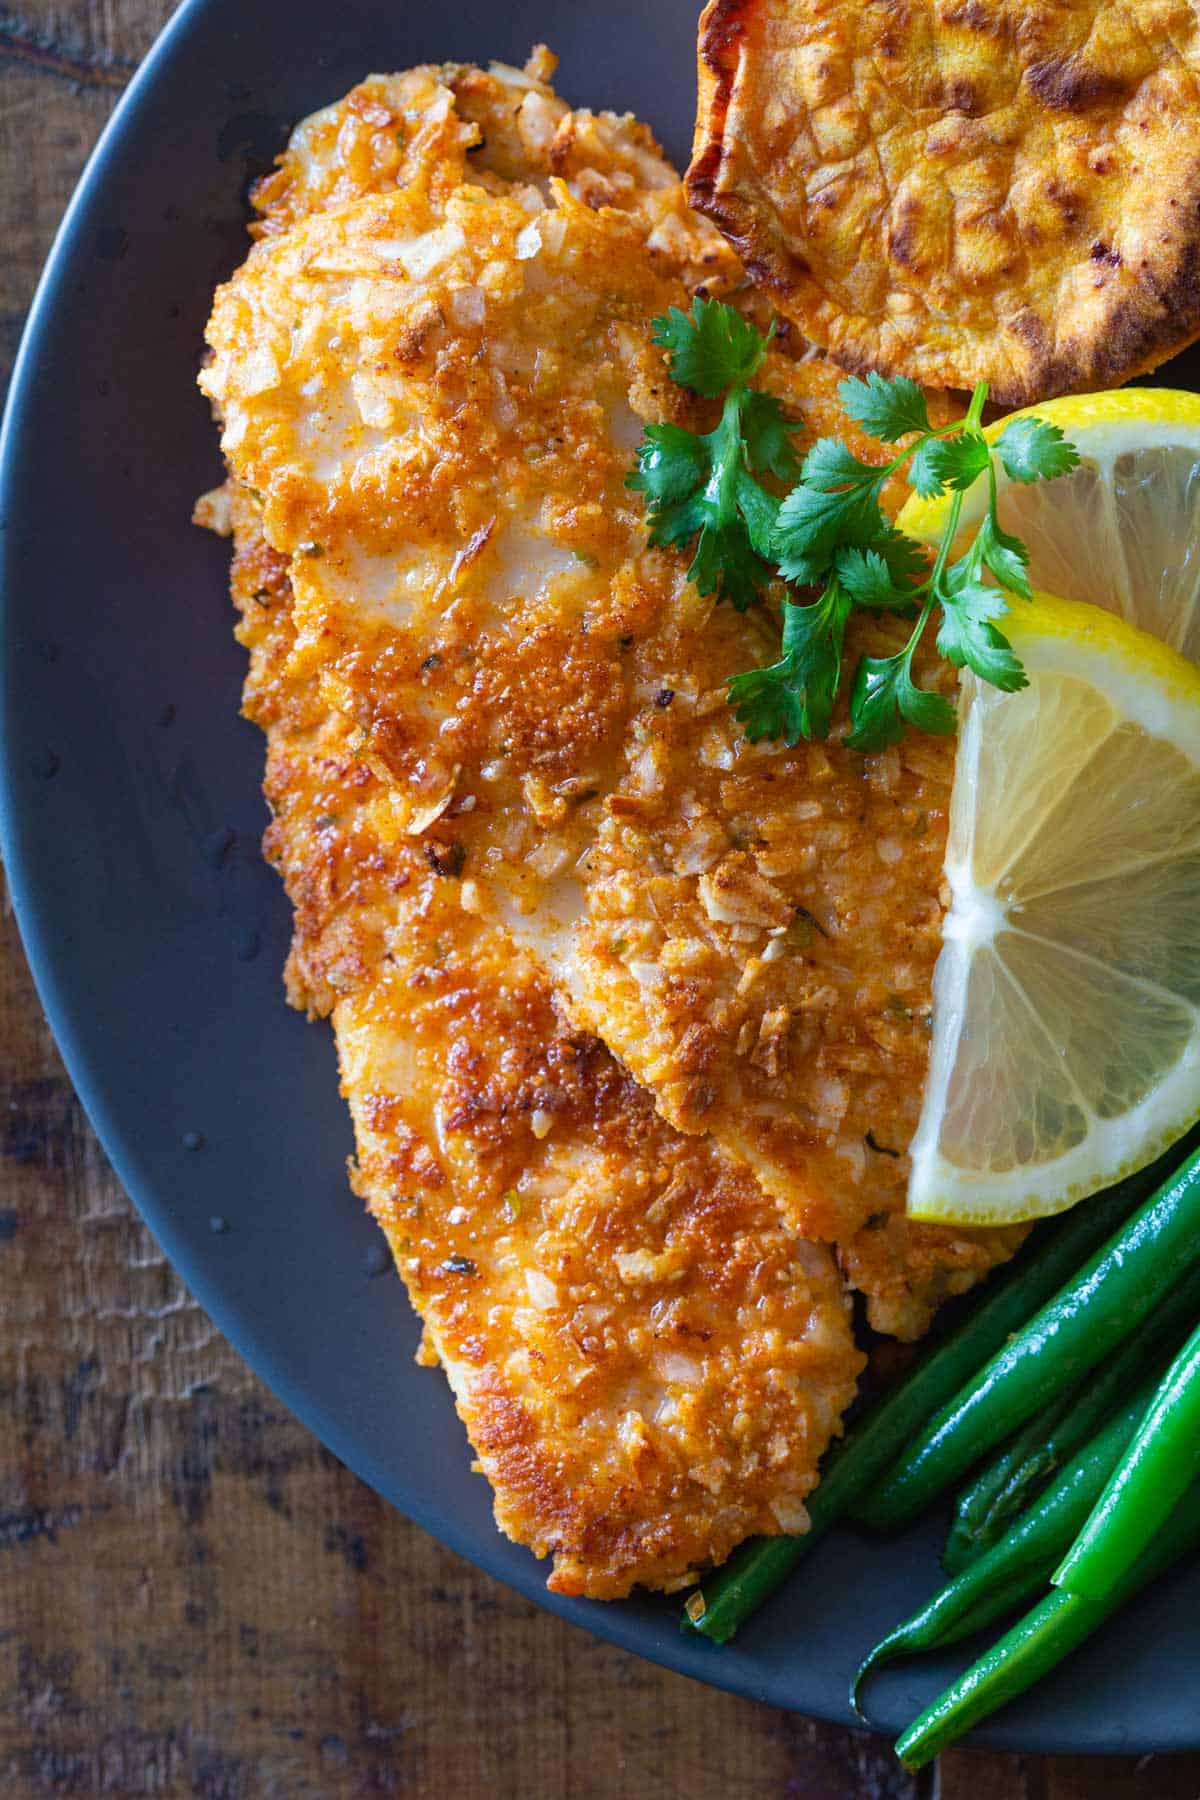 Breaded sole fish fillet on a plate.